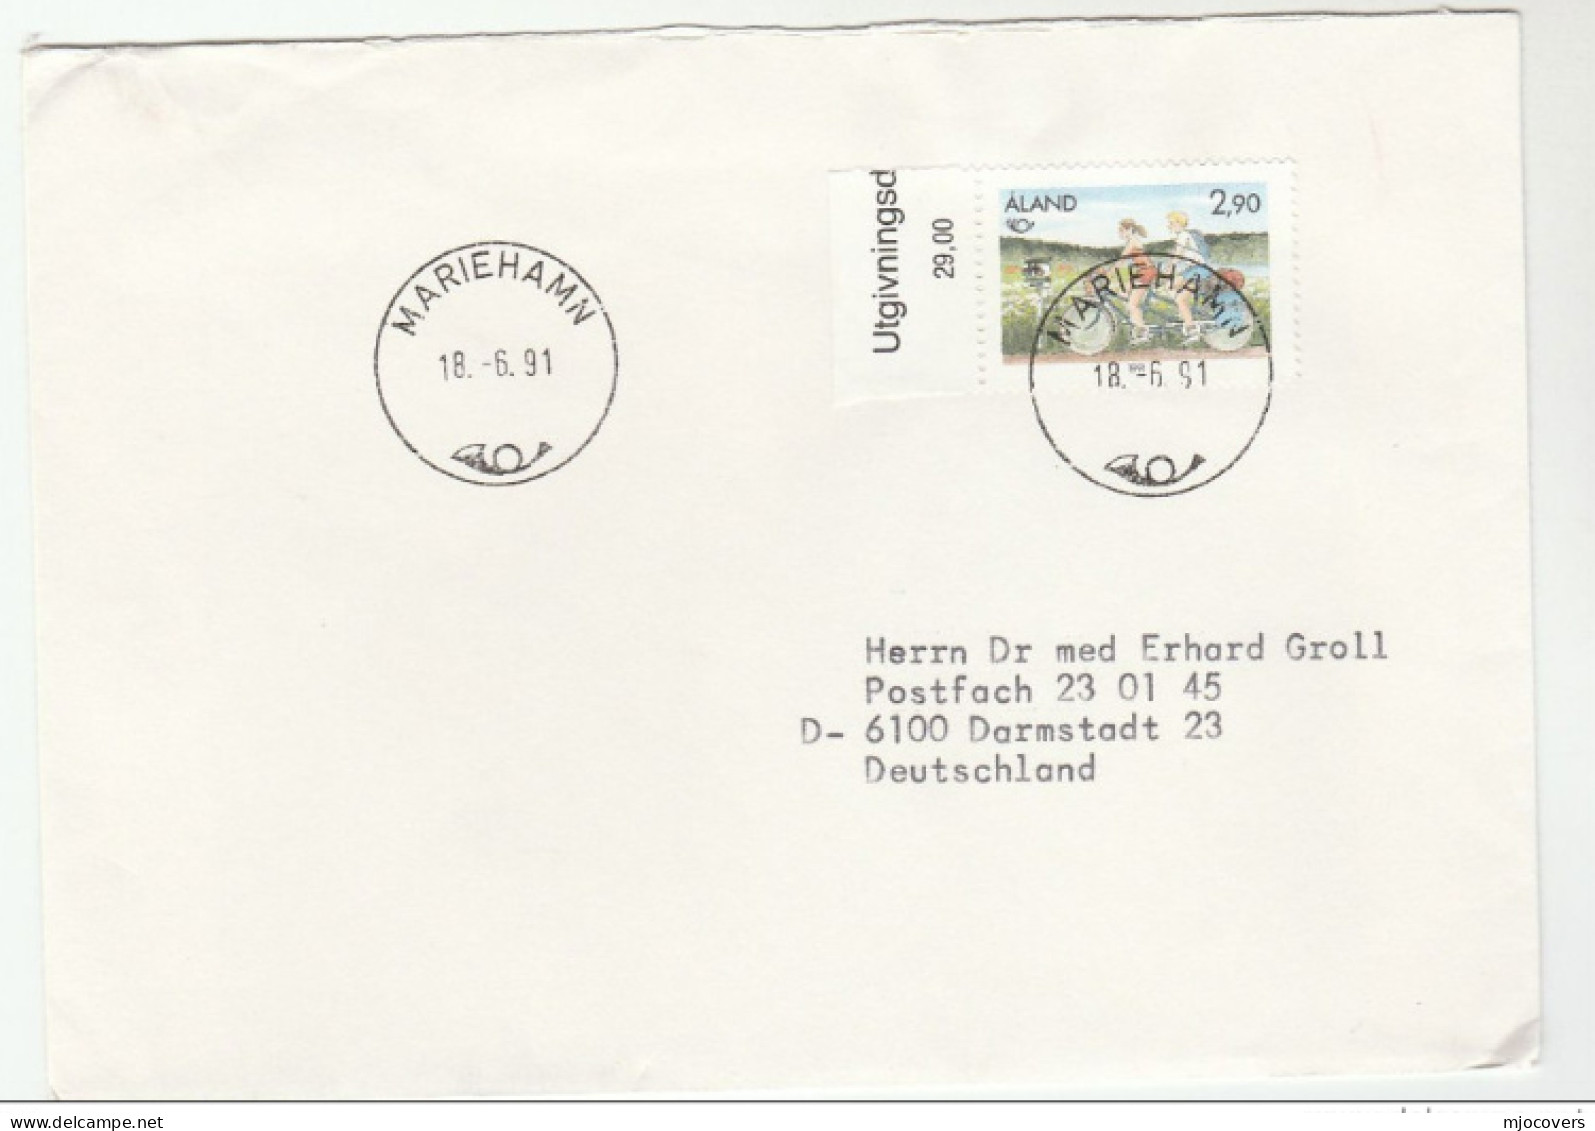 CYCLING Mariehamn ALAND Cover To Germany Bike Bicycle 1991 Stamps - Vélo